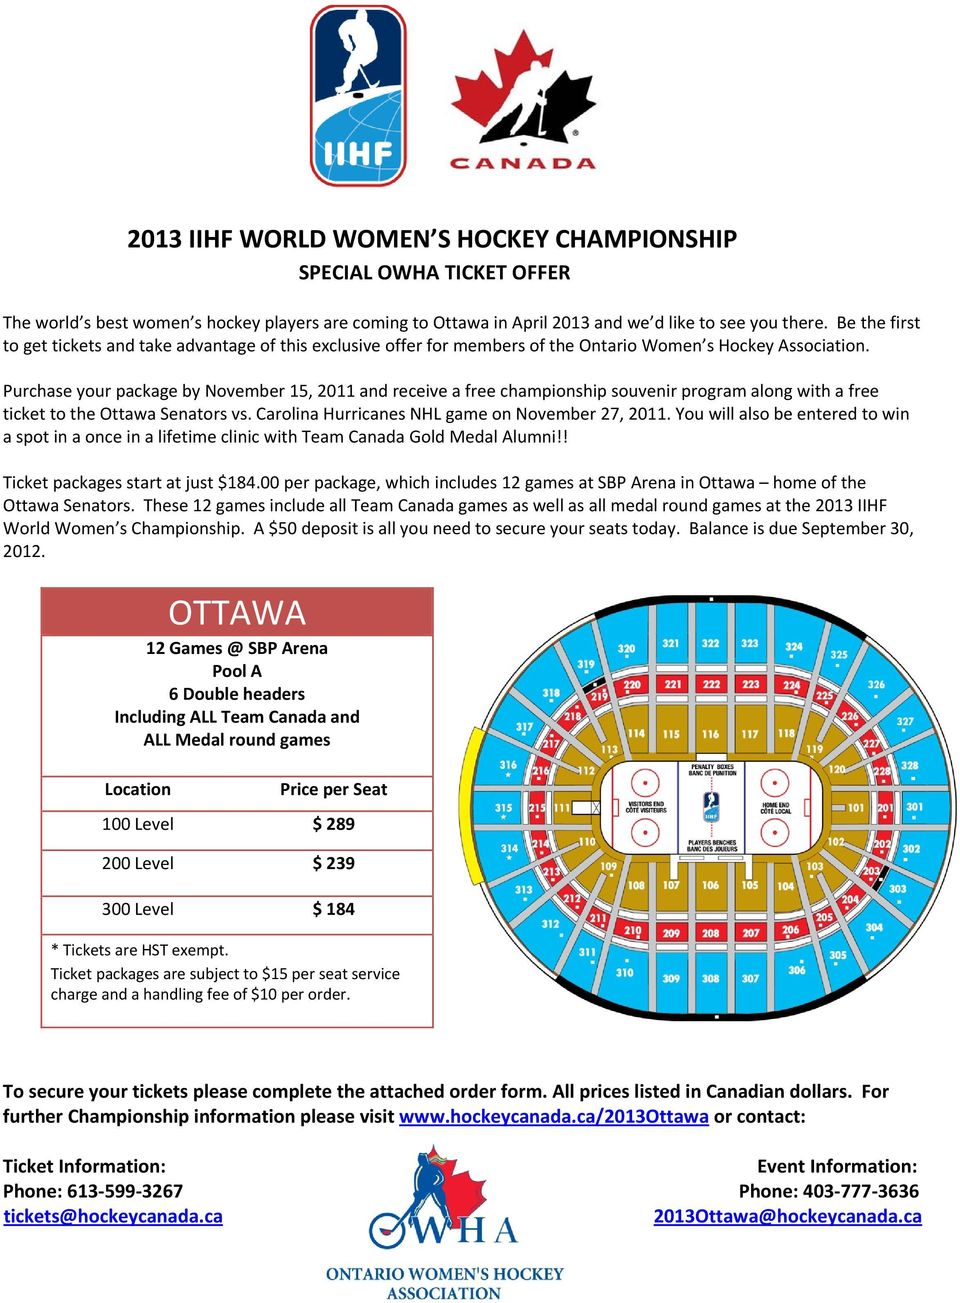 Purchase your package by November 15, 2011 and receive a free championship souvenir program along with a free ticket to the Ottawa Senators vs. Carolina Hurricanes NHL game on November 27, 2011.